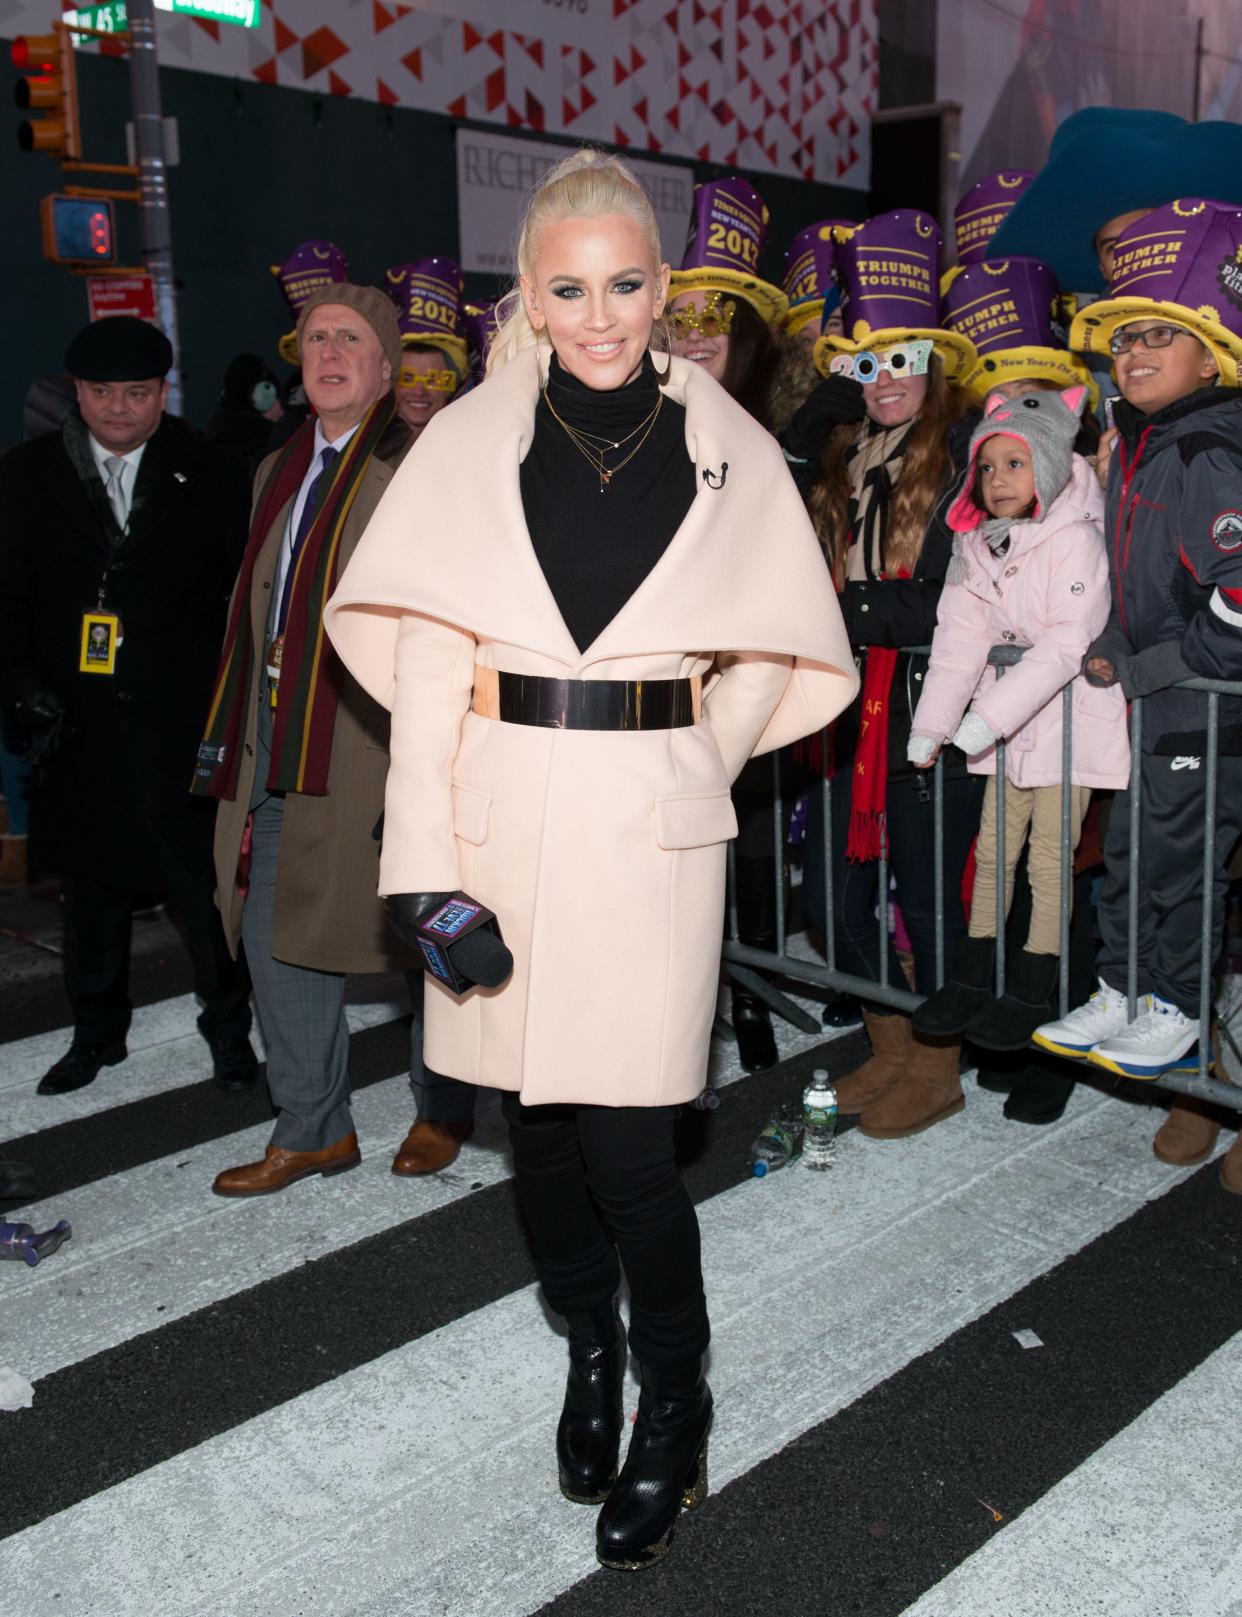 Jenny McCarthy poses on New Year's Eve holding a m